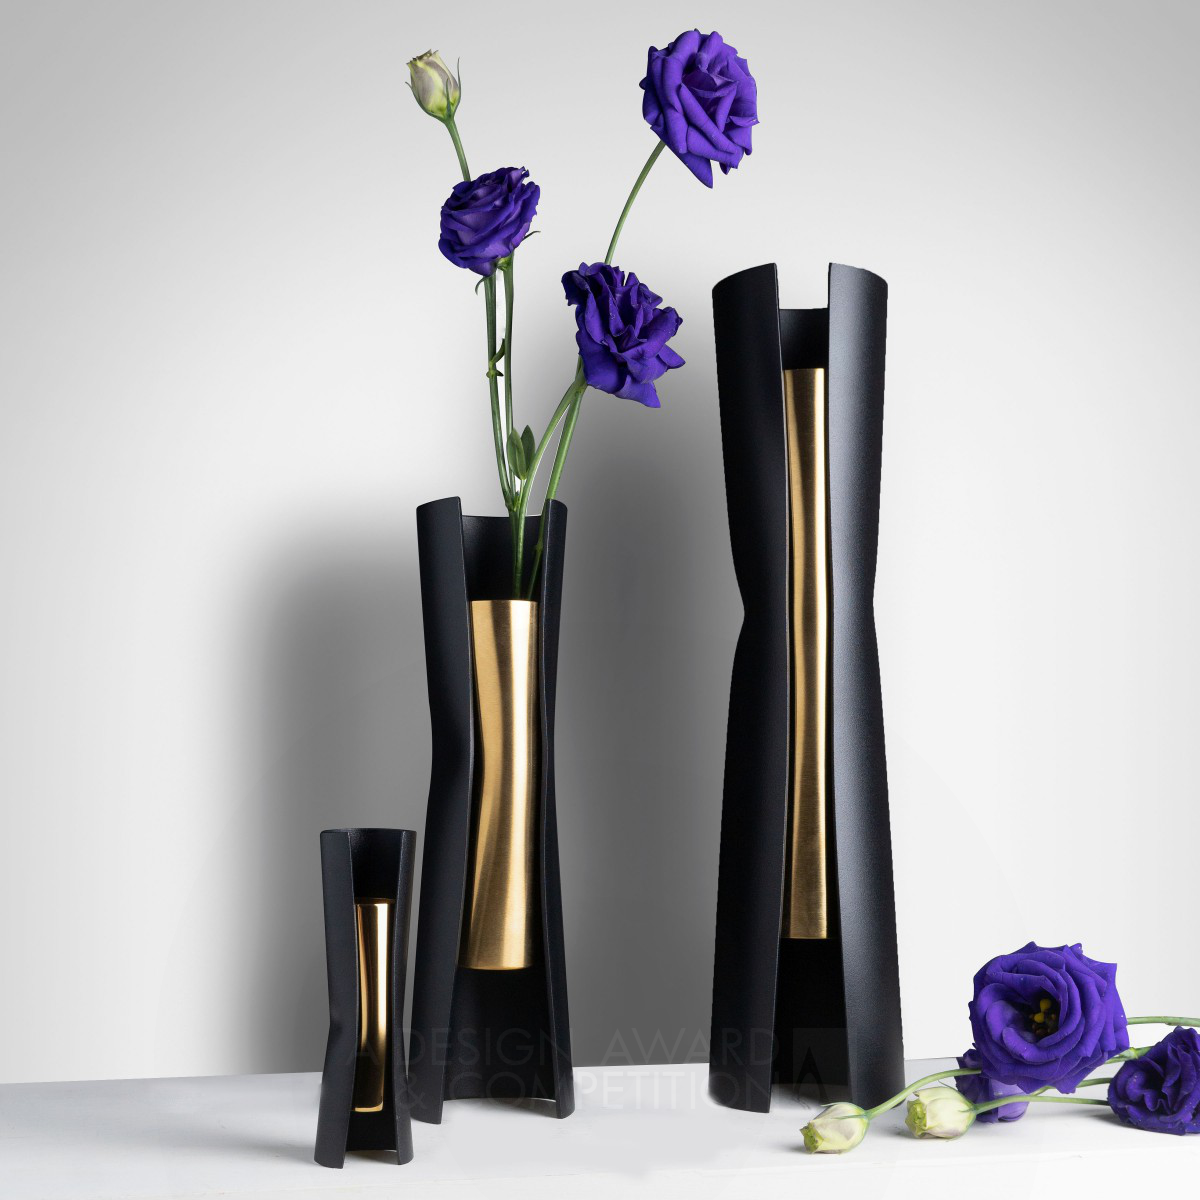 ChungSheng Chen wins Bronze at the prestigious A' Furniture Design Award with Courbe Vase.